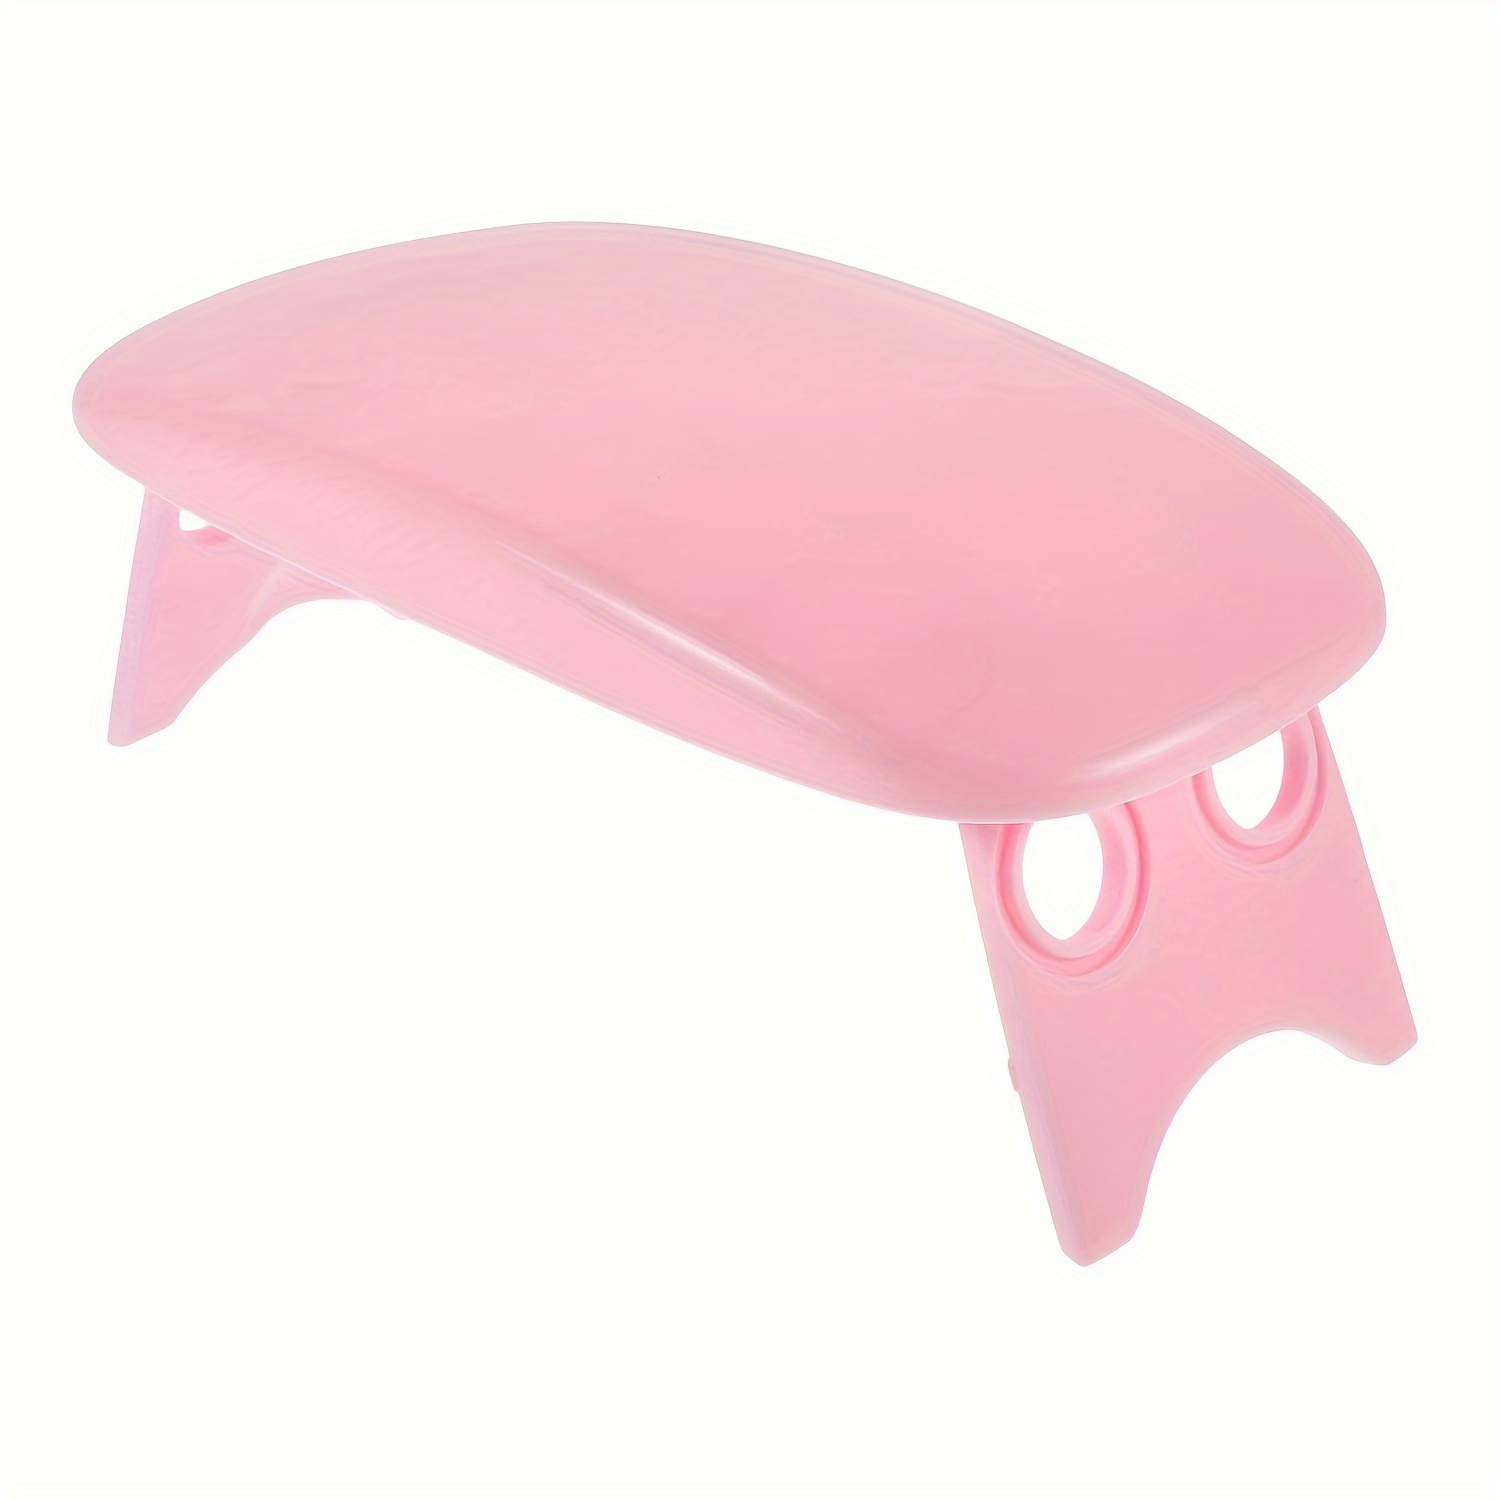 

Foldable Pink Nail Arm Rest, Manicure Wrist Support Stand, Sturdy & Smooth Surface Nail Tray, Easy Storage For Nail Salon & Home Use